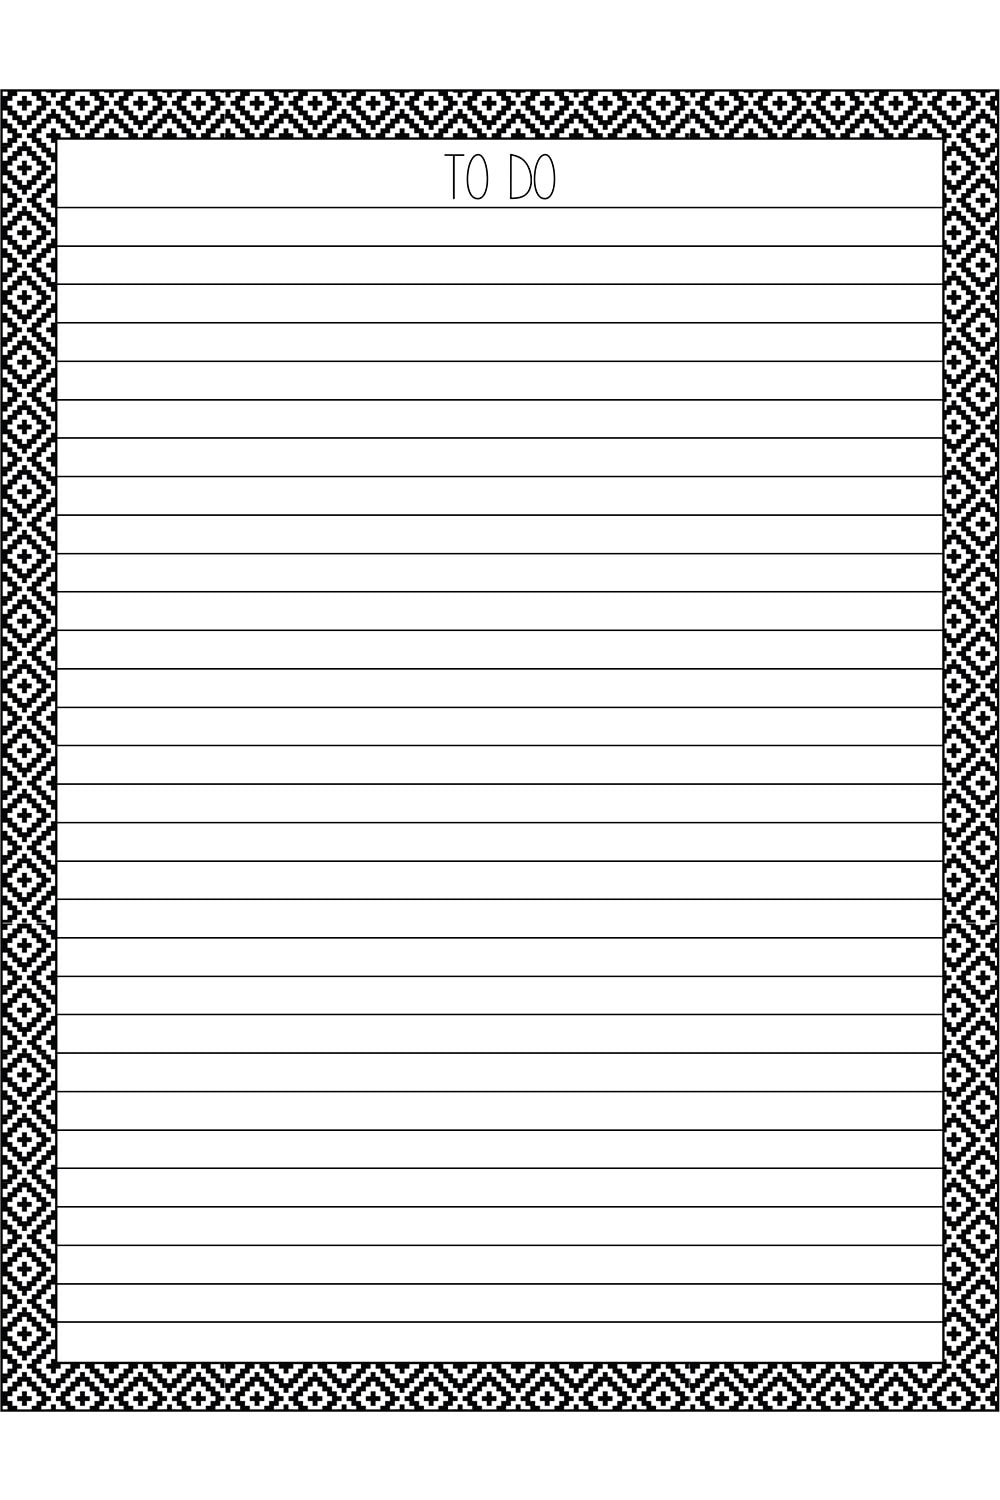 image of free printable to do lists - has a tribal black and white background, lined paper, and says to do at the time.